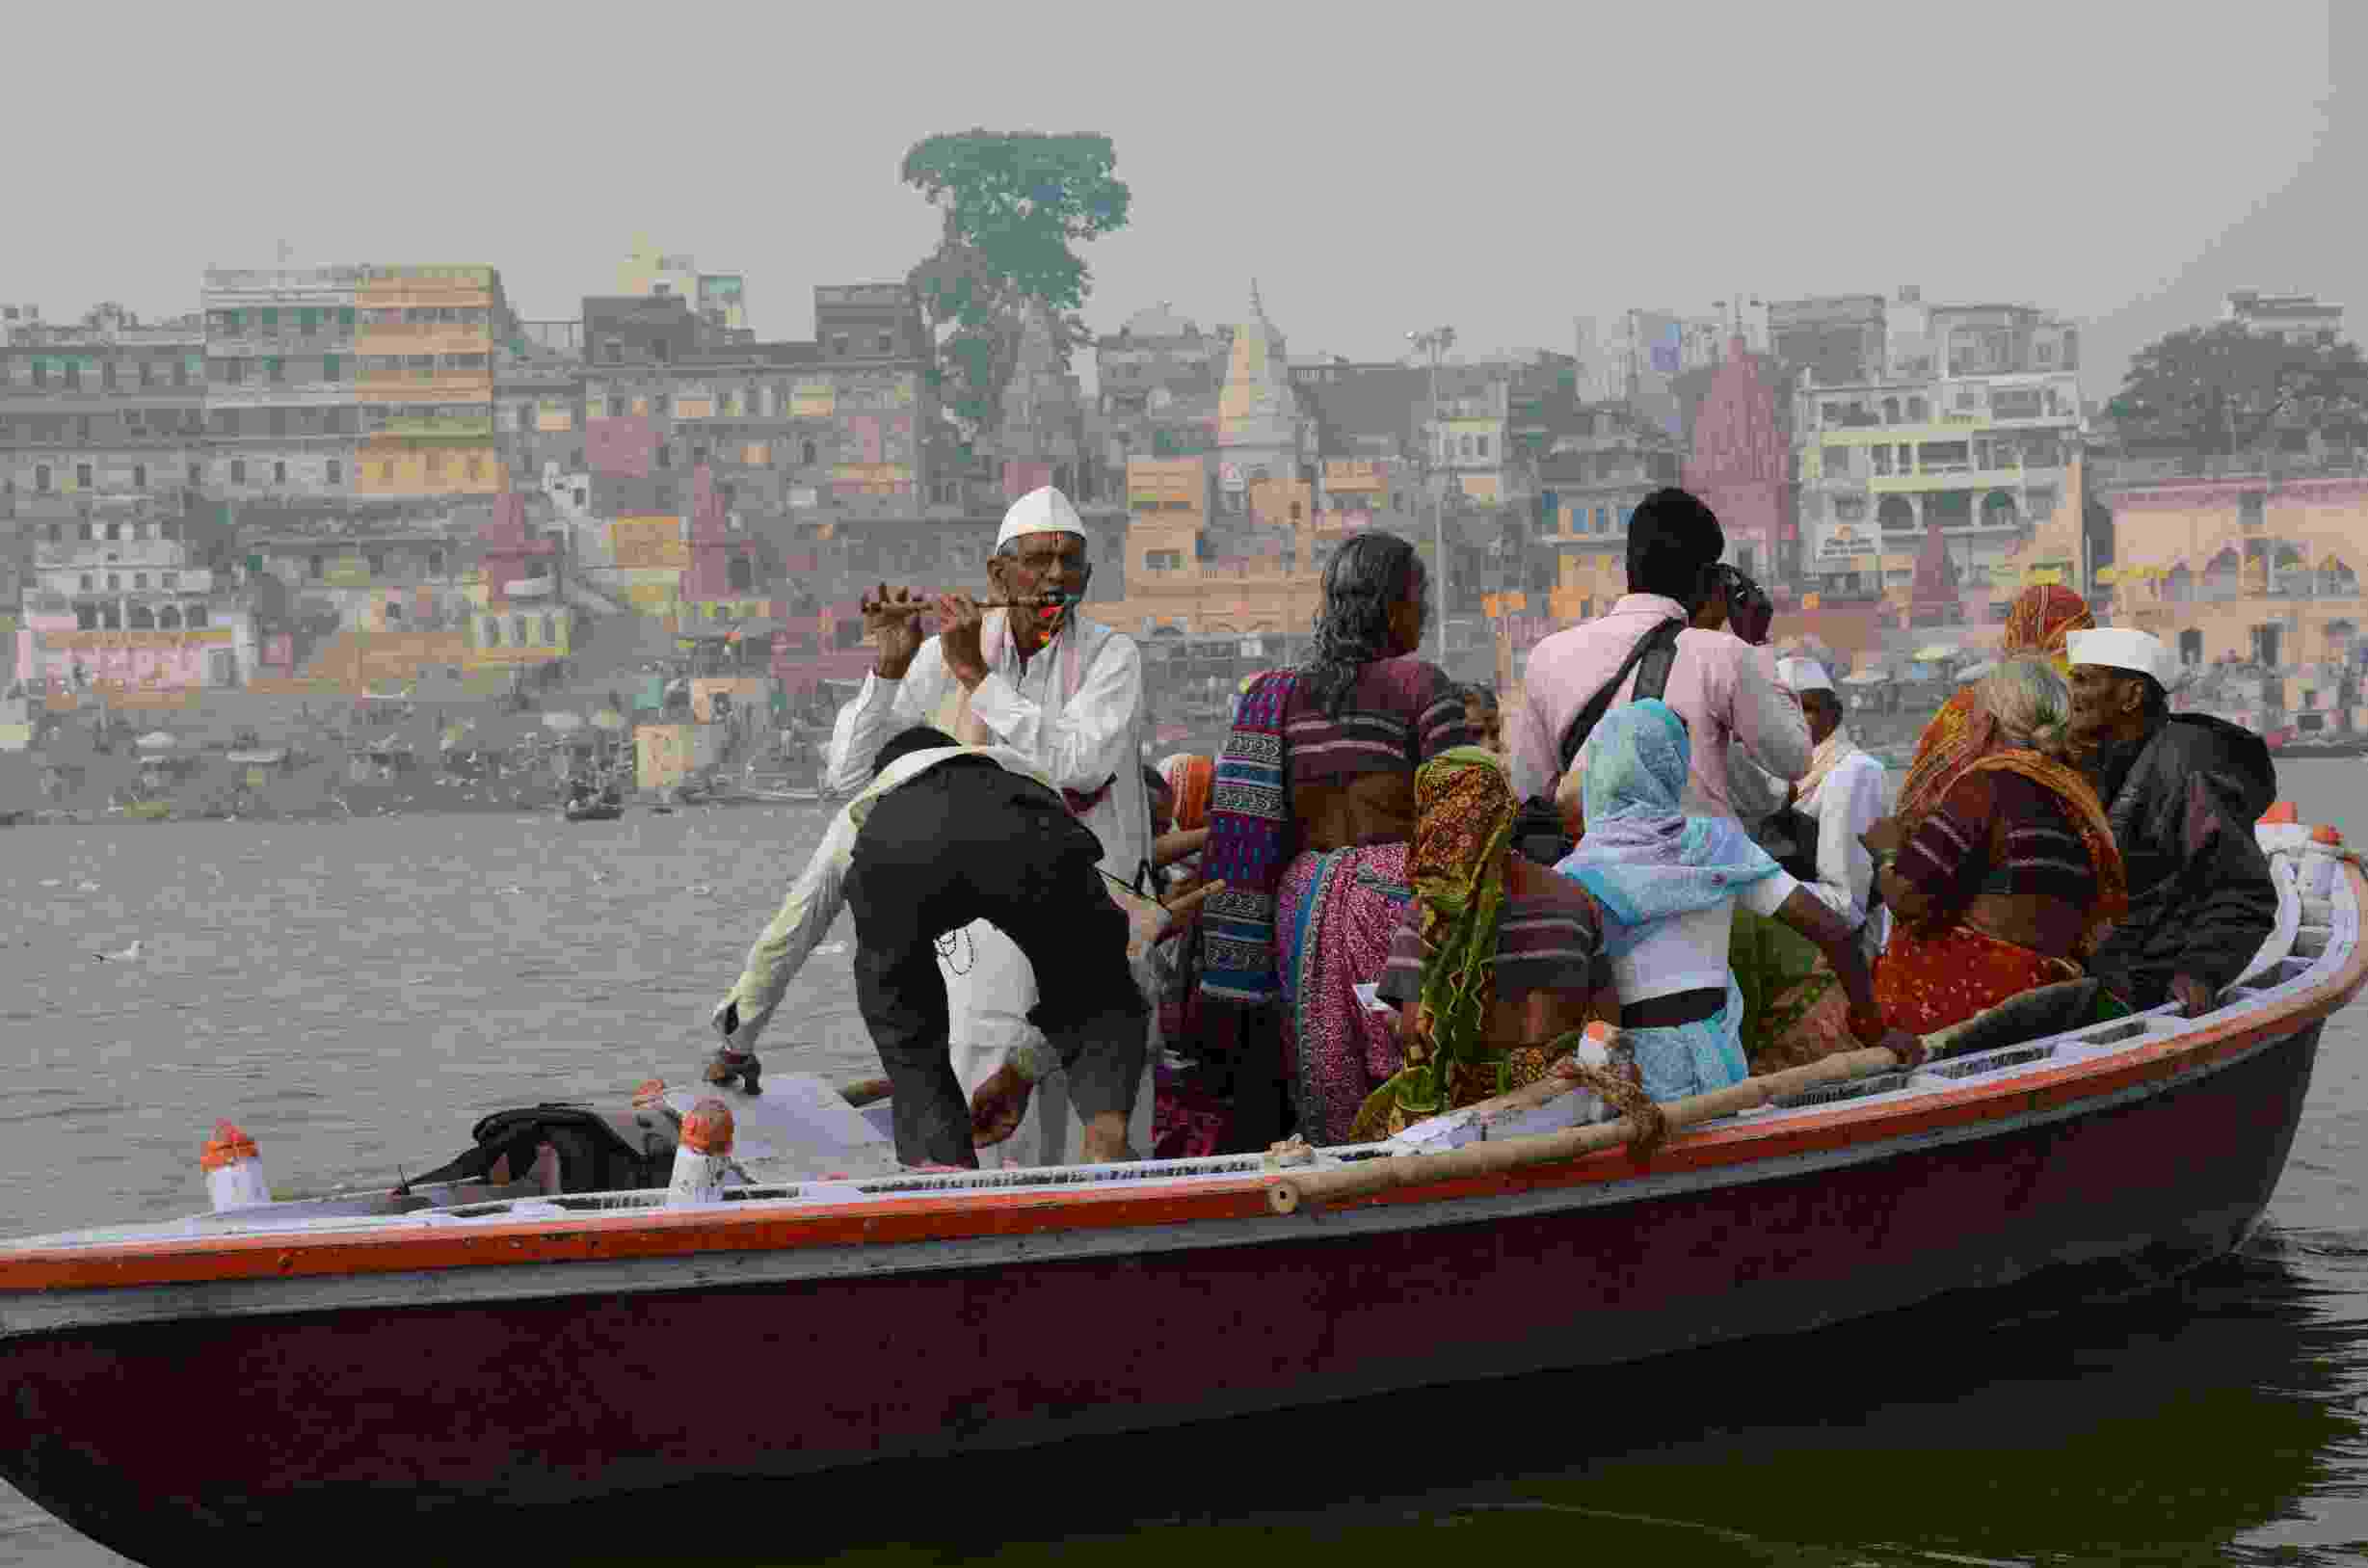 Image shows a man playing a pipe in boat on the River Ganges, amongst a group of brightly dressed people